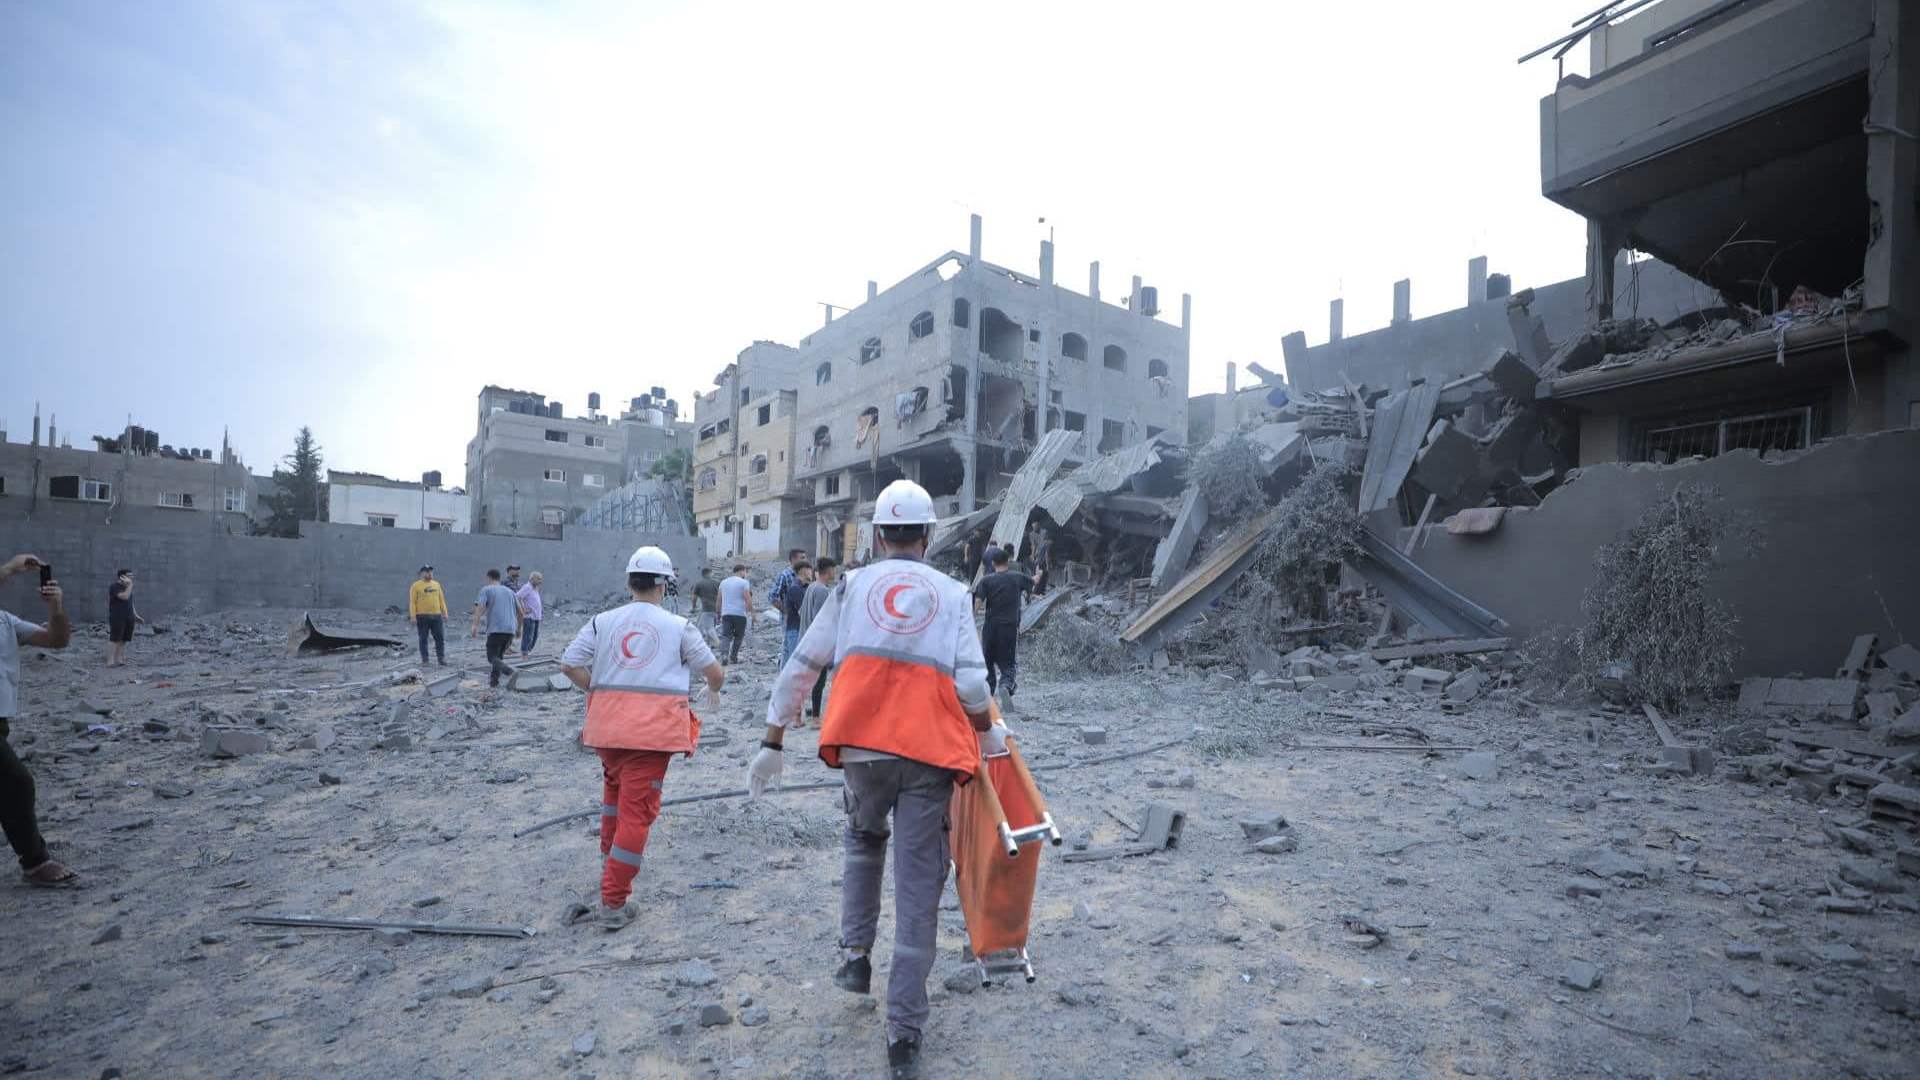 Unanswered pleas: PRCS ambulance team&#39;s fate unknown after attempt to save 6-year-old in Gaza